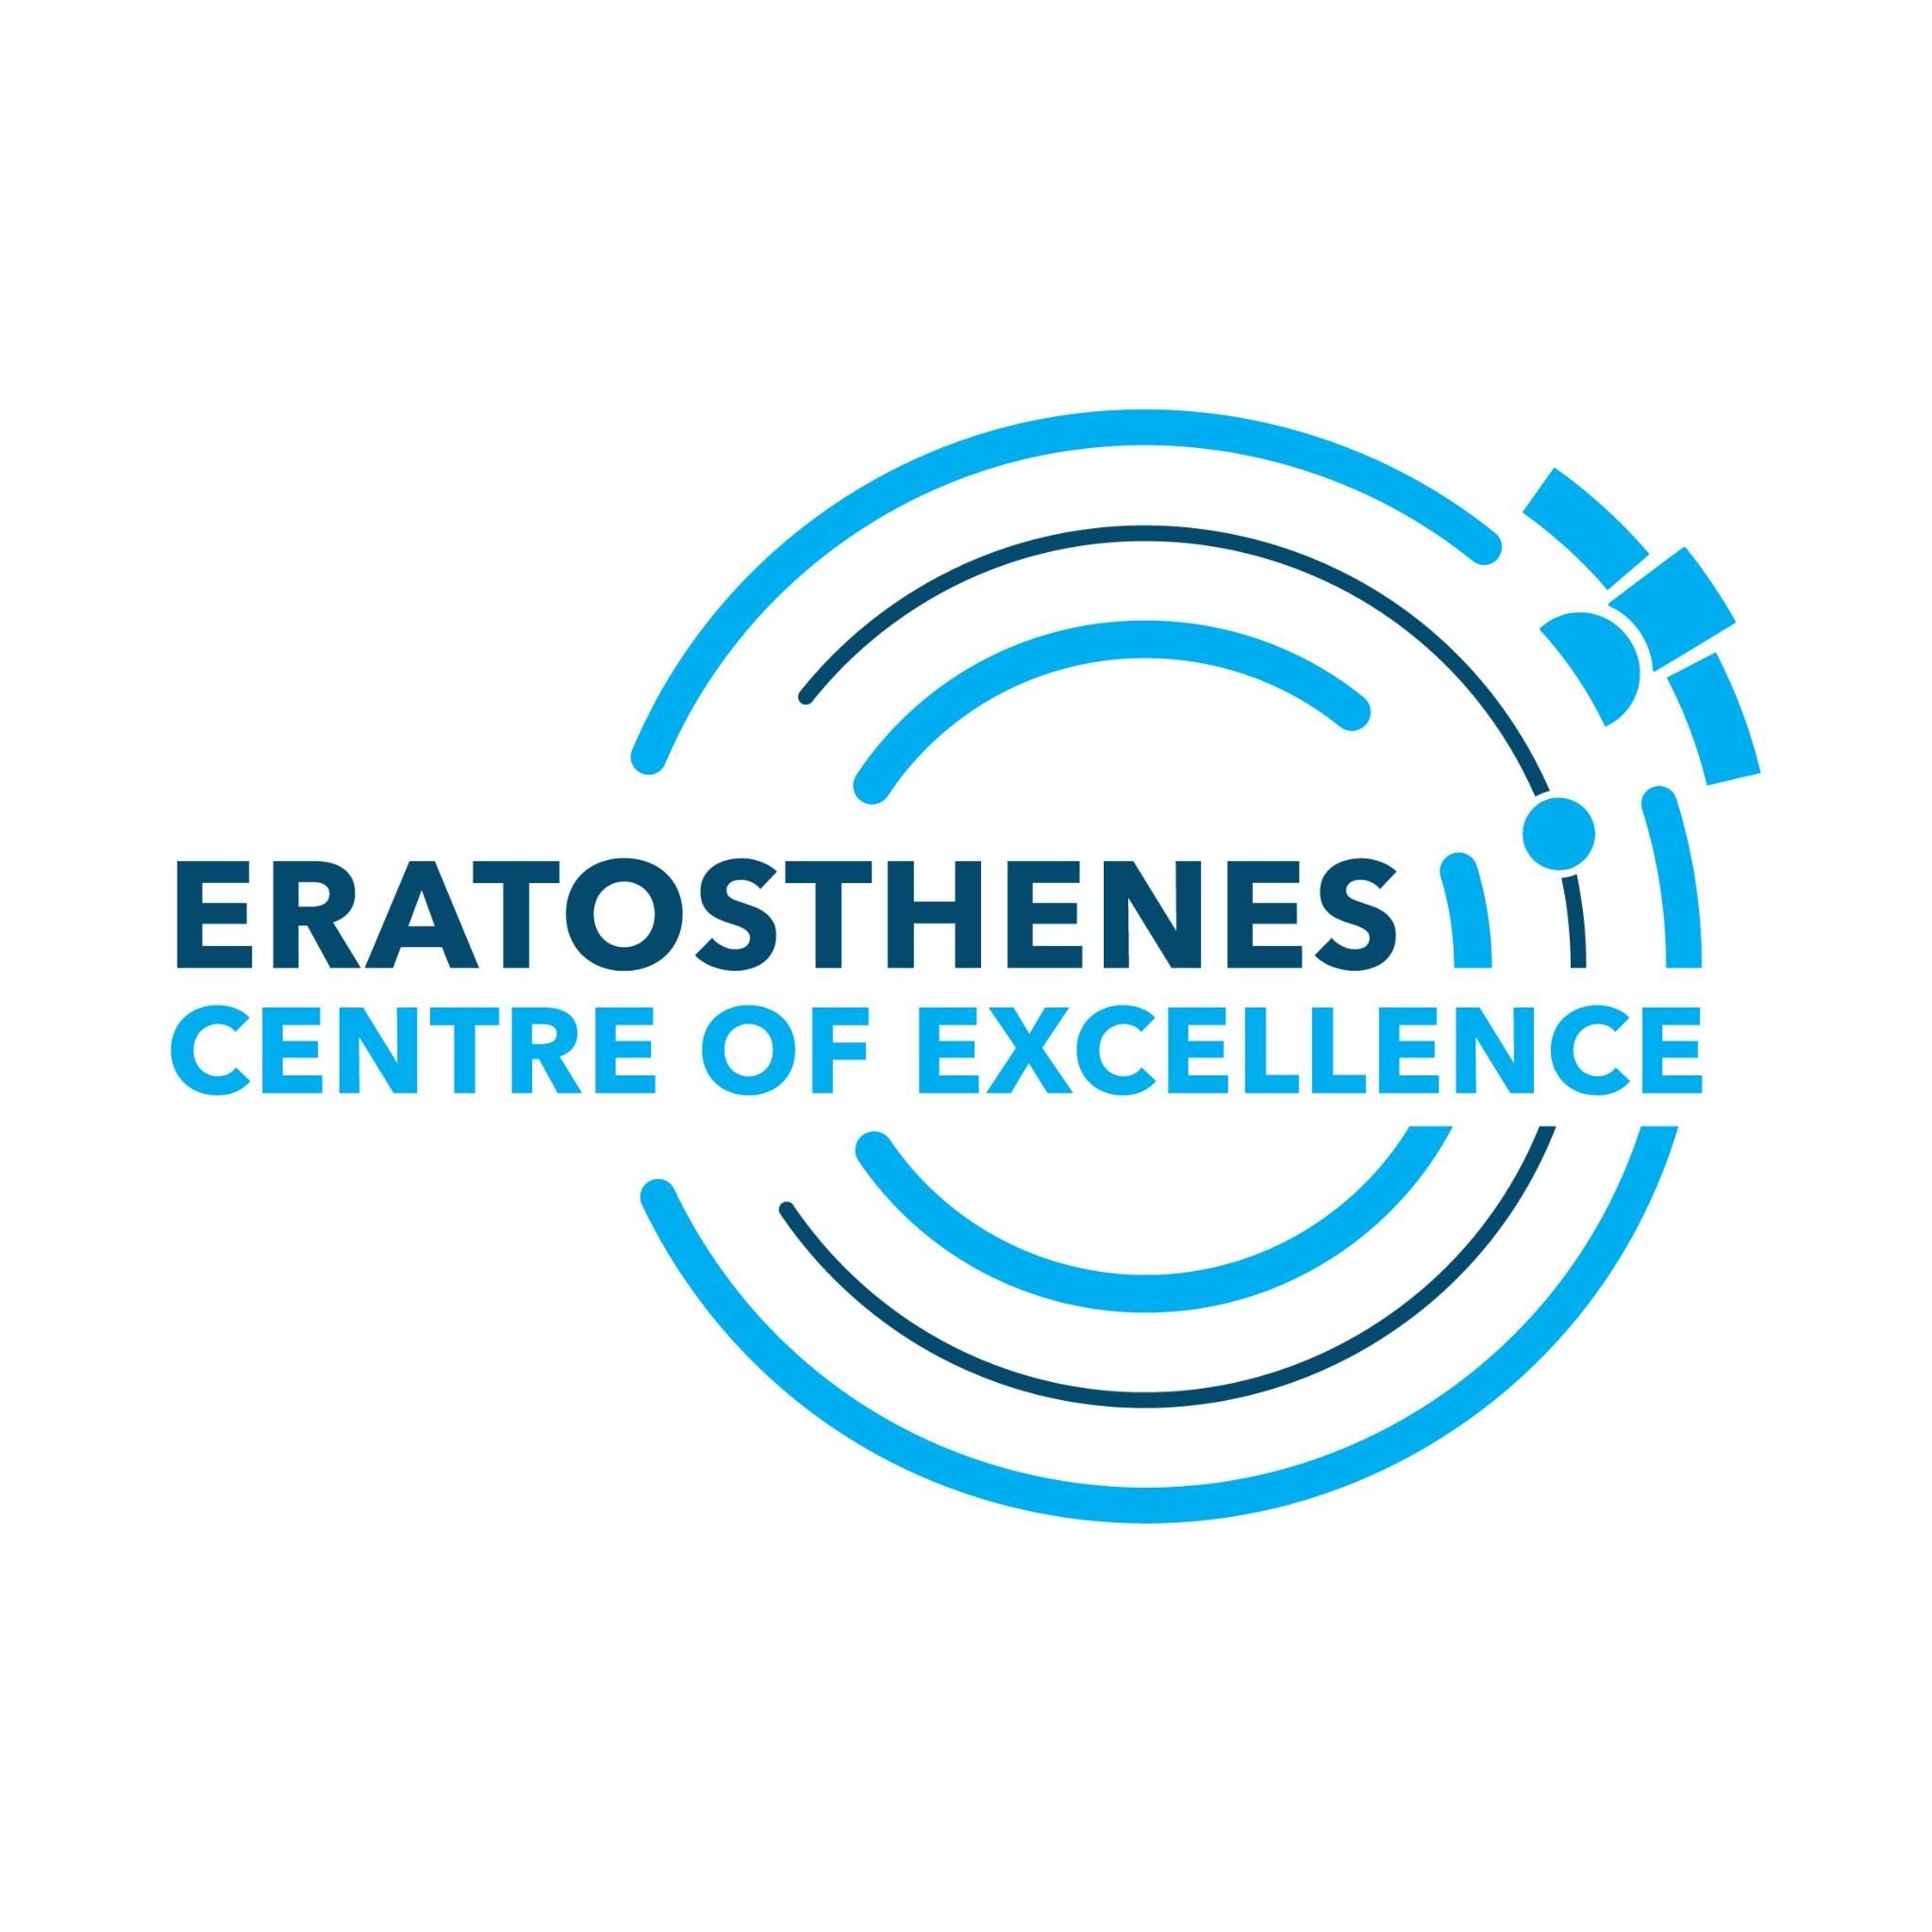 Eratosthenes Centre of Excellence